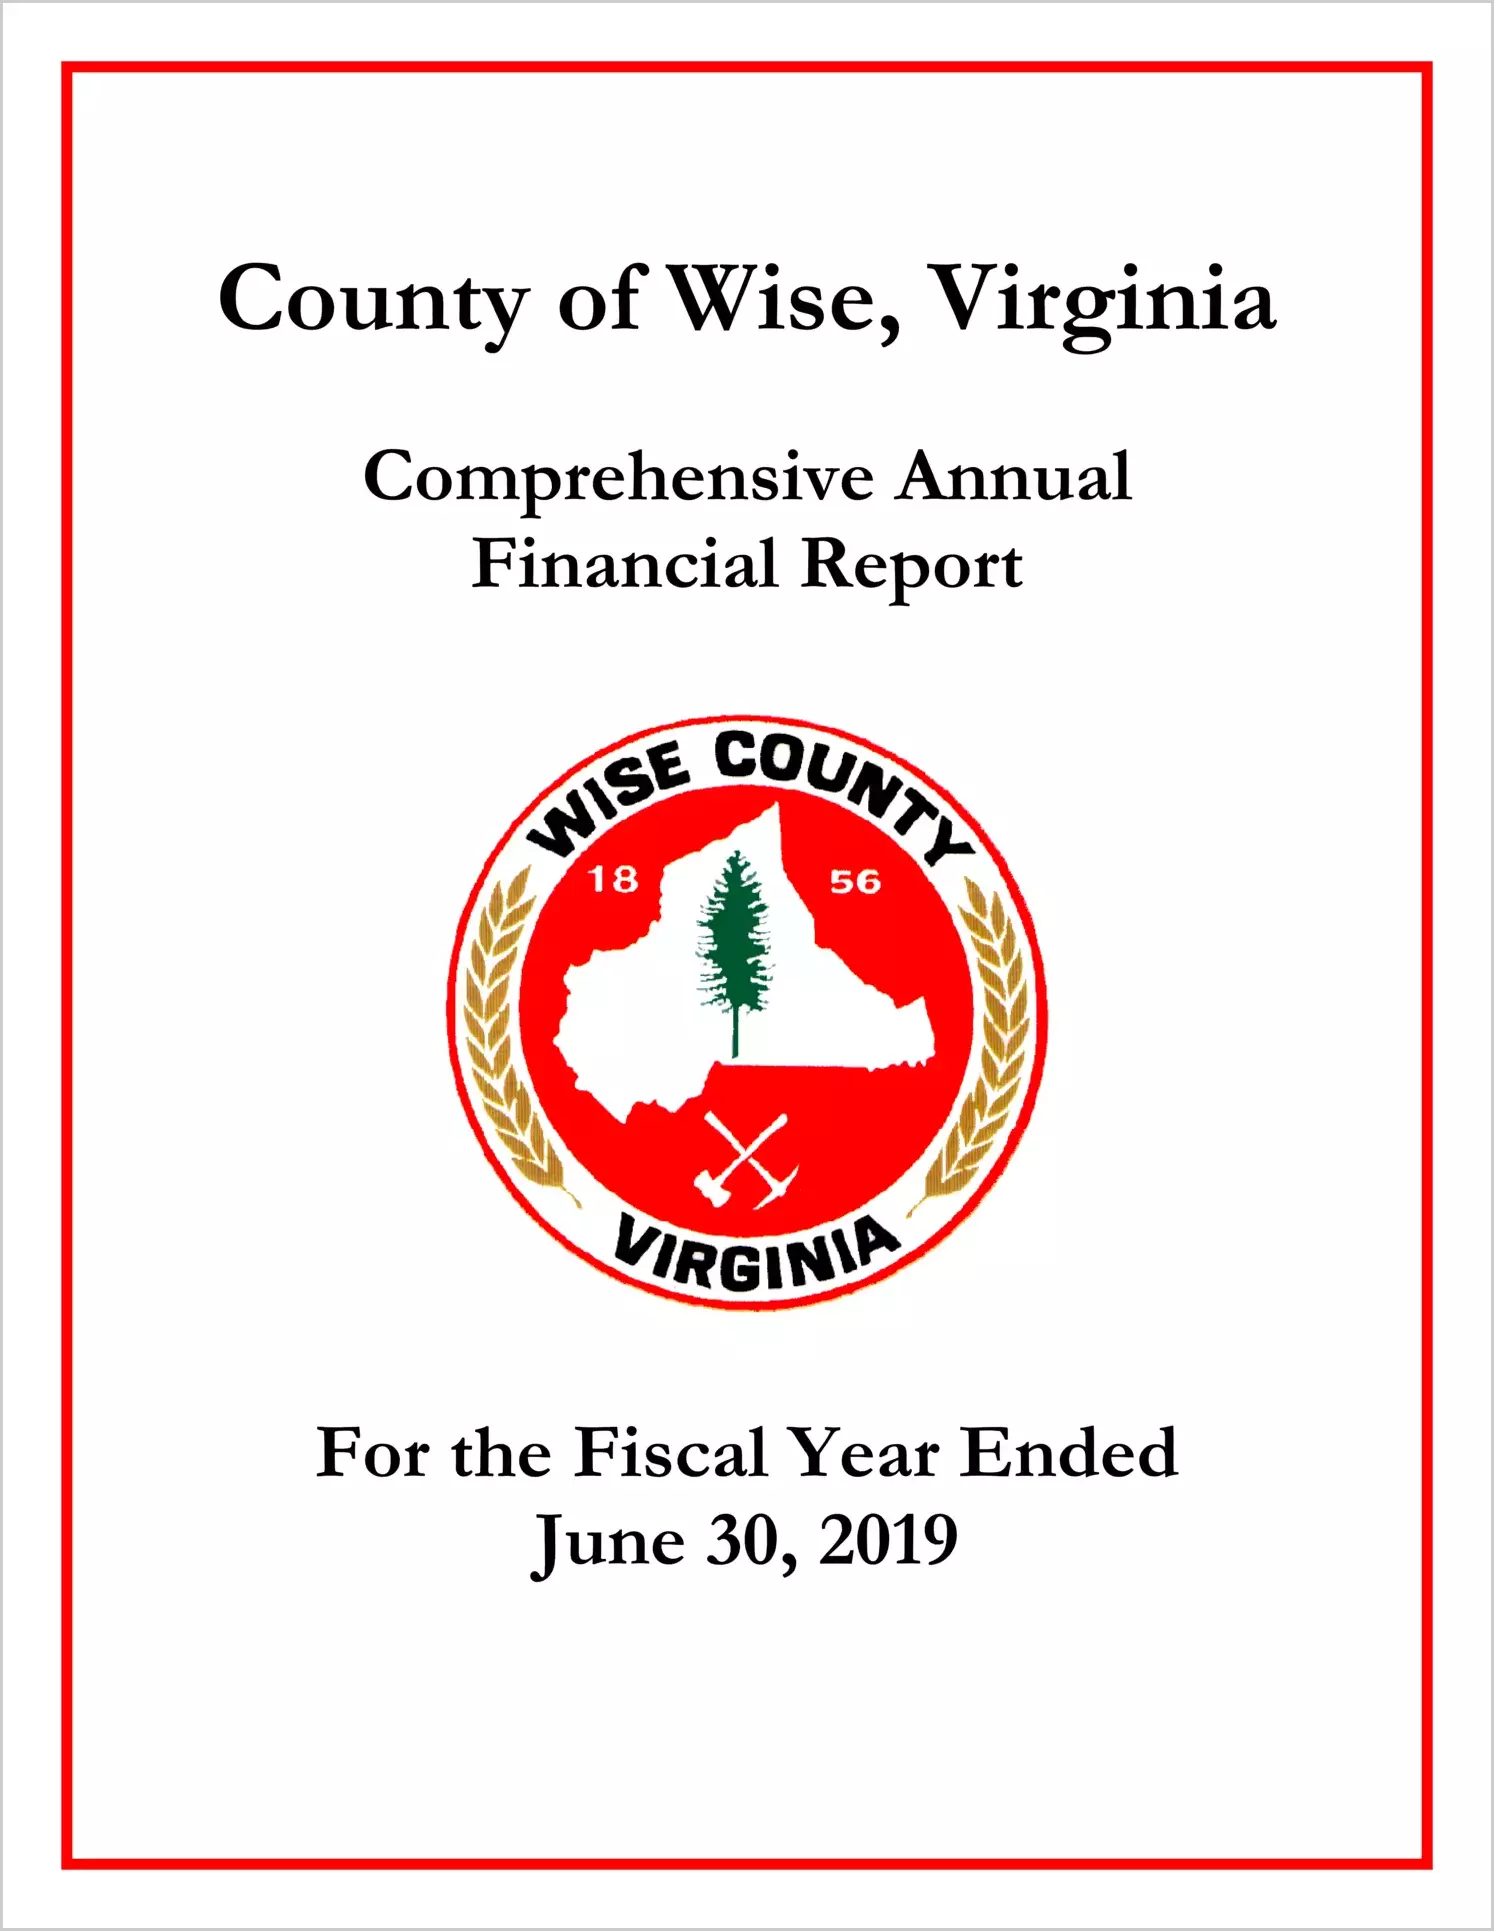 2019 Annual Financial Report for County of Wise